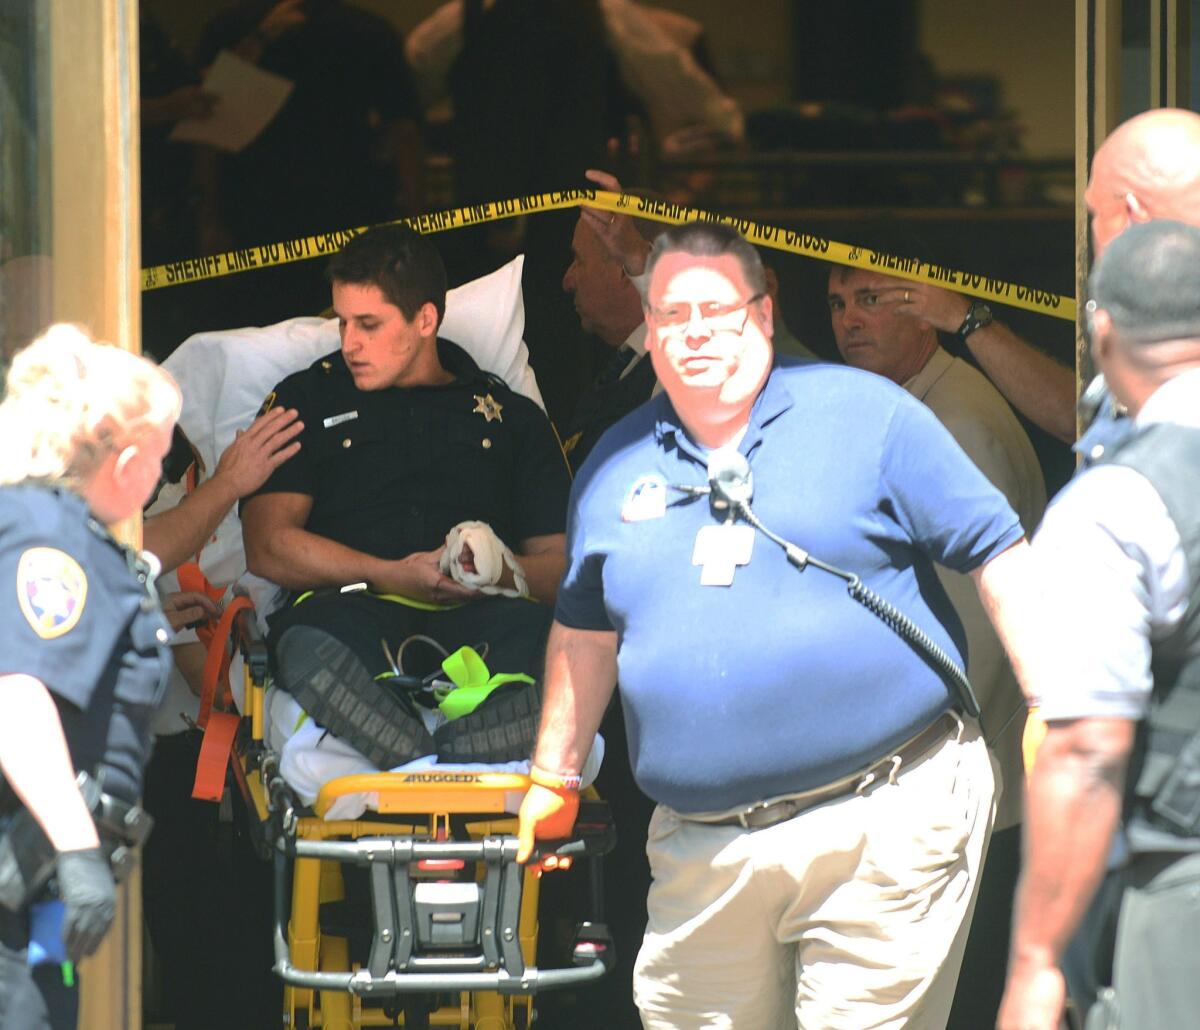 A sheriff's deputy with a hand injury is taken from the lobby of the Chester County Courthouse following a shooting in Pennsylvania.